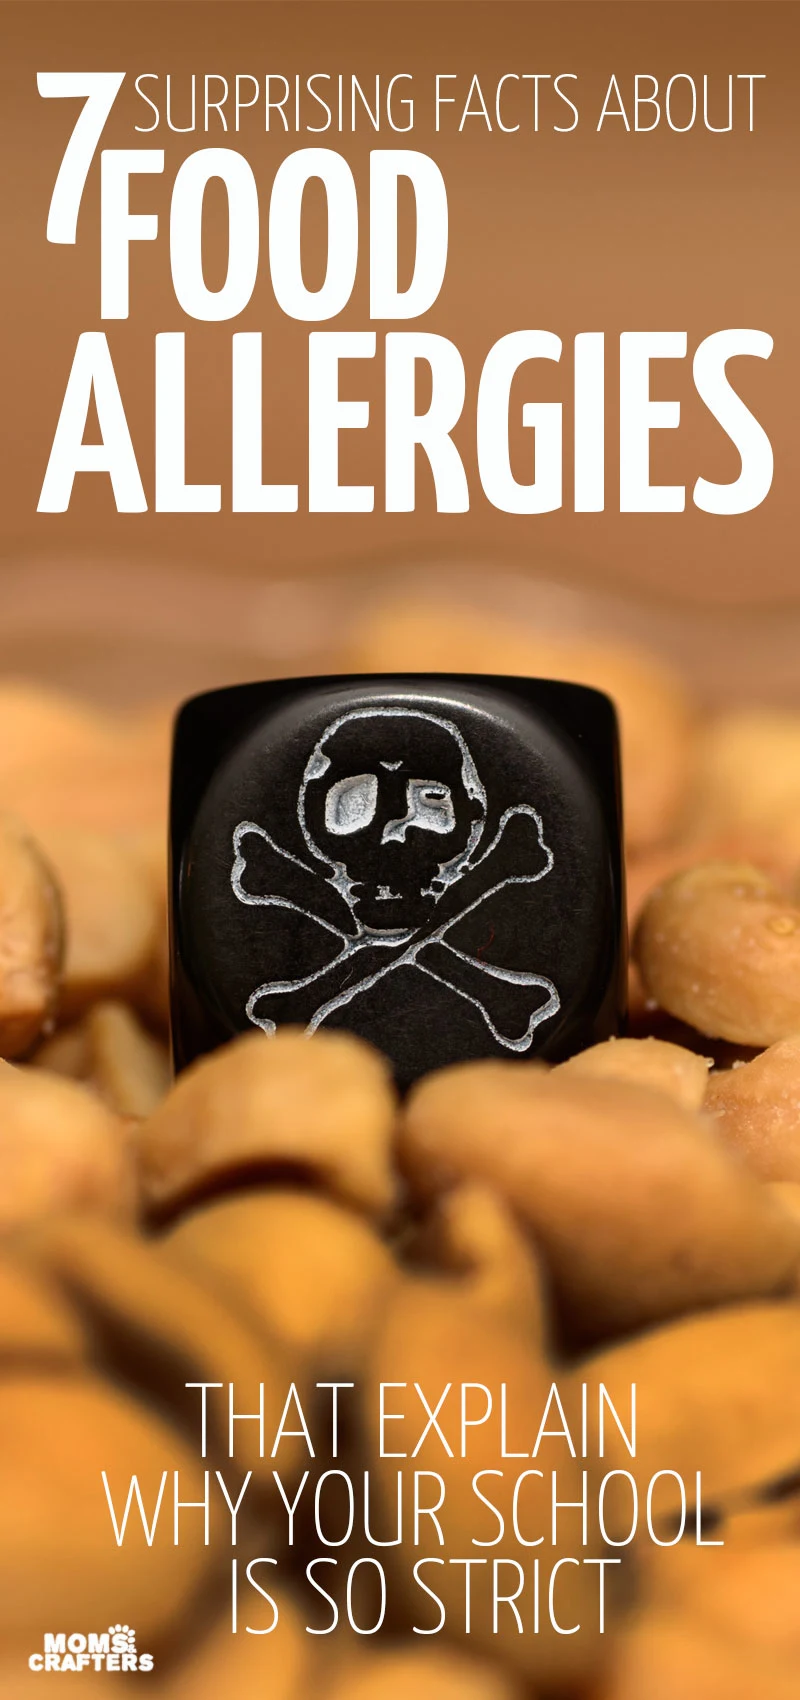 What's the deal with school rules and food allergies anyway? Why no traces? Help spread some allergy awareness by sharing this post which highlights the severity of many food allergies, airborne reactions and anaphylaxis, peanut allergies, tree nut allergies, and more important allergy facts!